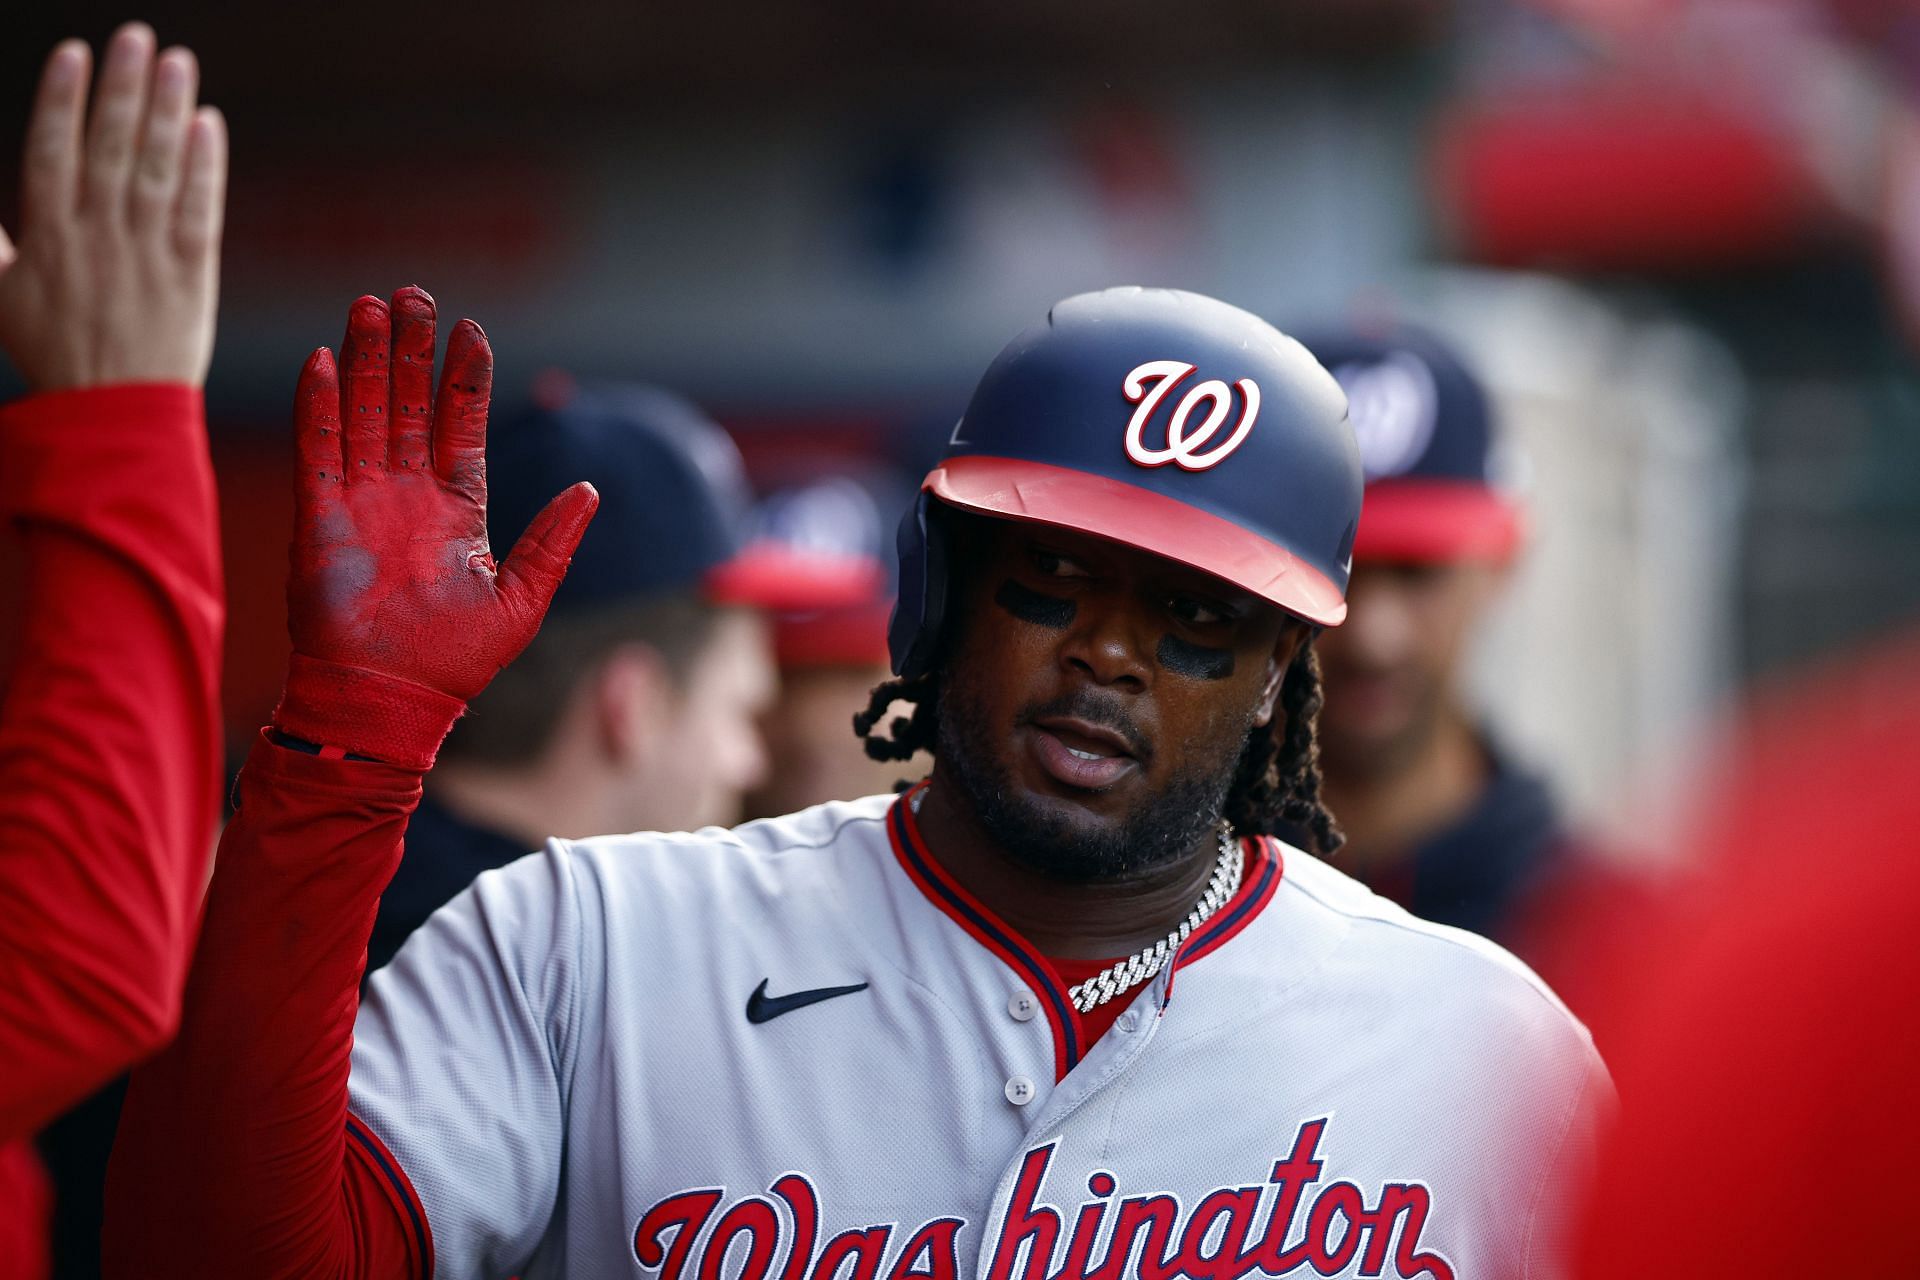 Washington Nationals 1B Josh Bell would bring contact-hitting and a LHB to the Toronto Blue Jays lineup.